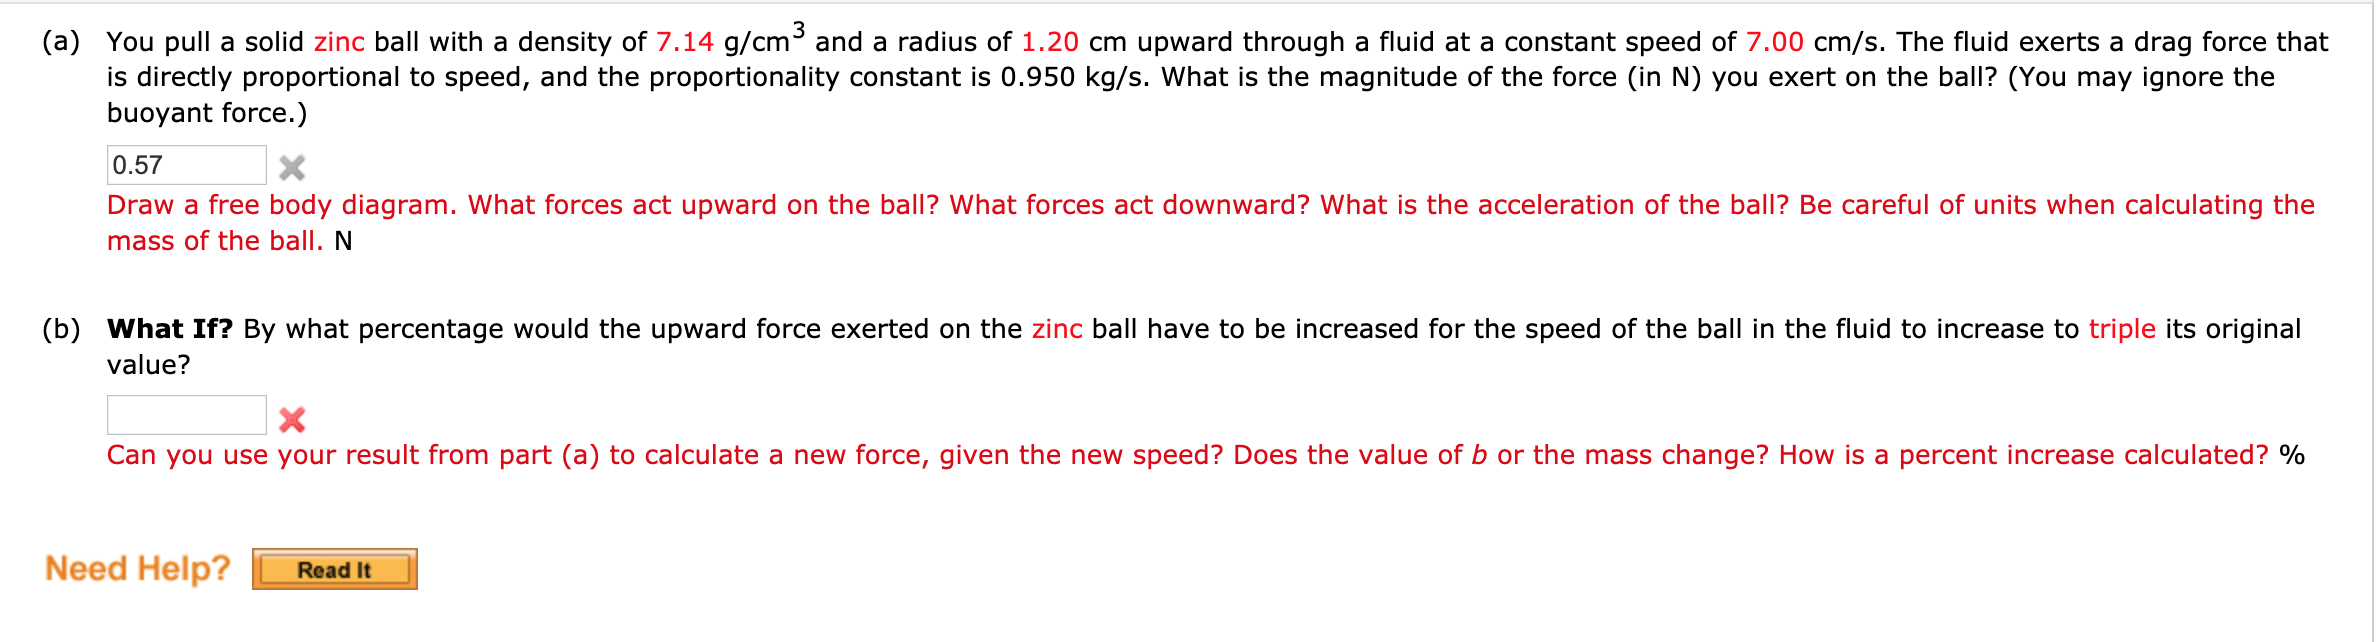 3
(a) You pull a solid zinc ball with a density of 7.14 g/cm and a radius of 1.20 cm upward through a fluid at a constant speed of 7.00 cm/s. The fluid exerts a drag force that
is directly proportional to speed, and the proportionality constant is 0.950 kg/s. What is the magnitude of the force (in N) you exert on the ball? (You may ignore the
buoyant force.)
0.57
X
Draw a free body diagram. What forces act upward on the ball? What forces act downward? What is the acceleration of the ball? Be careful of units when calculating the
mass of the ball. N
(b) What If? By what percentage would the upward force exerted on the zinc ball have to be increased for the speed of the ball in the fluid to increase to triple its original
value?
calculate a new force, given the new speed?
es the value of b or the mass change? How is a percent increase calculated? %
you use your result from part (a)
Need Help?
Read It
